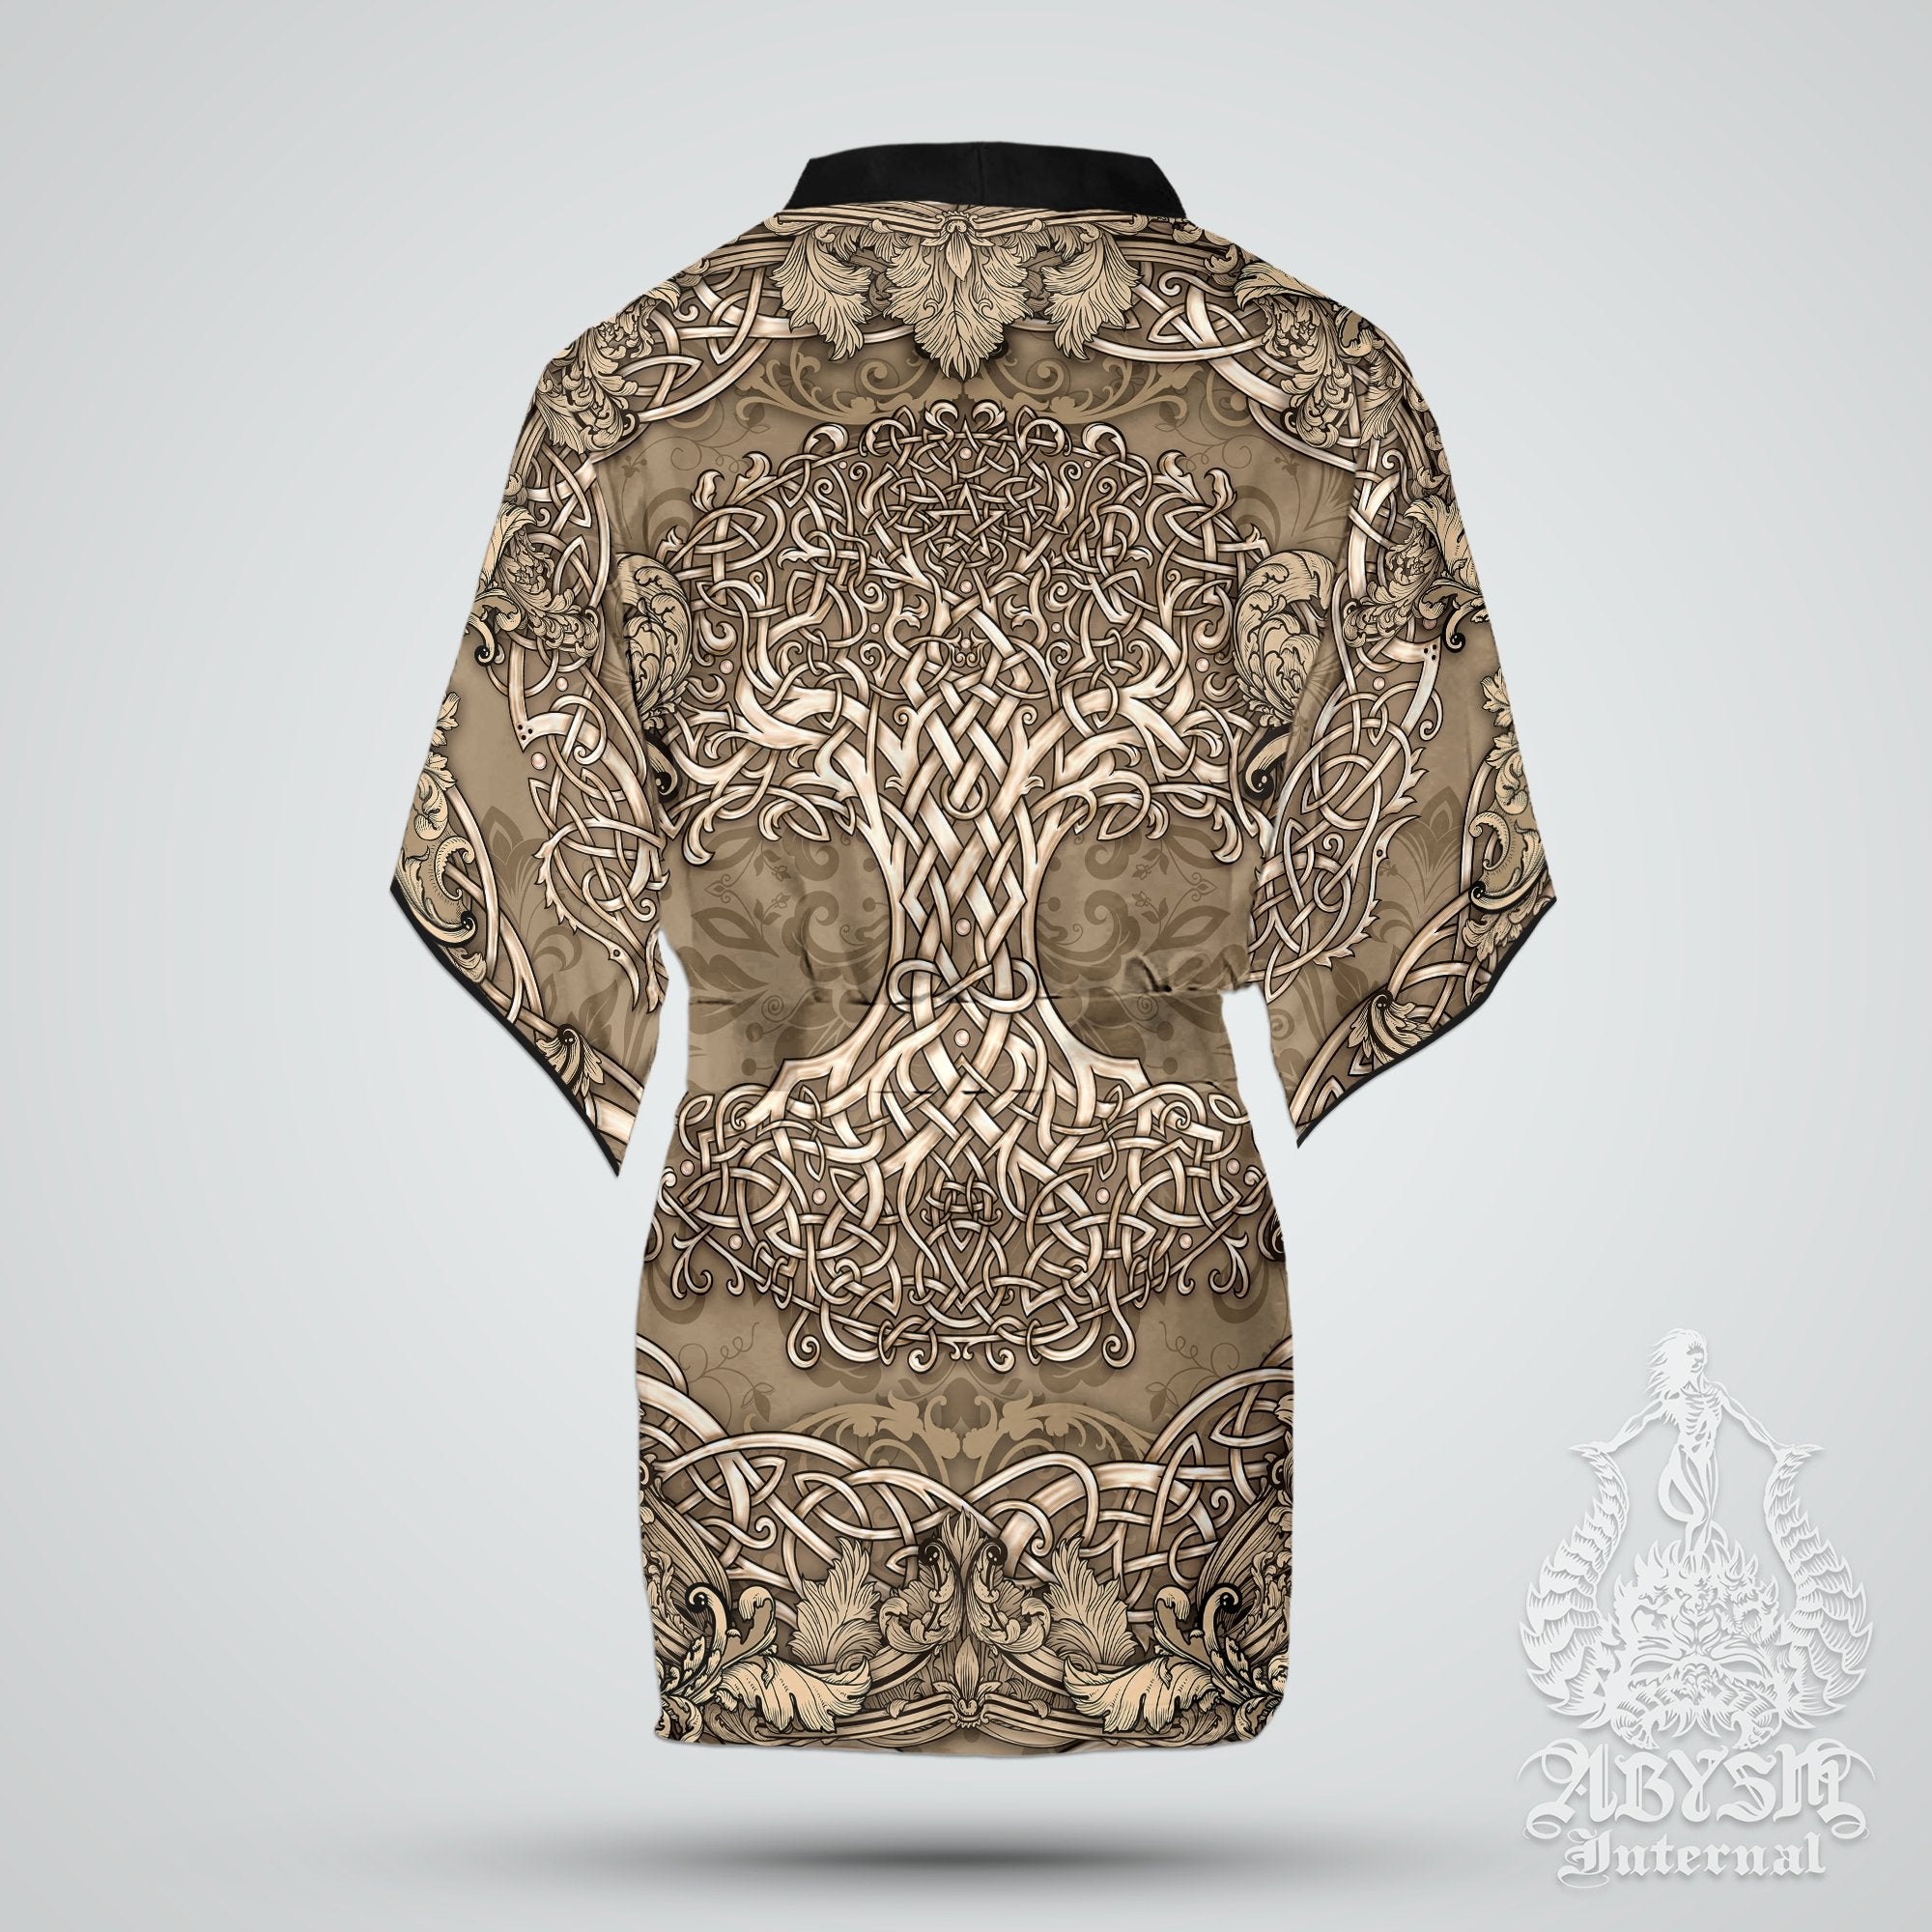 Tree of Life Cover Up, Beach Outfit, Celtic Party Kimono, Wicca Summer Festival Robe, Witchy Indie and Alternative Clothing, Unisex - Cream - Abysm Internal